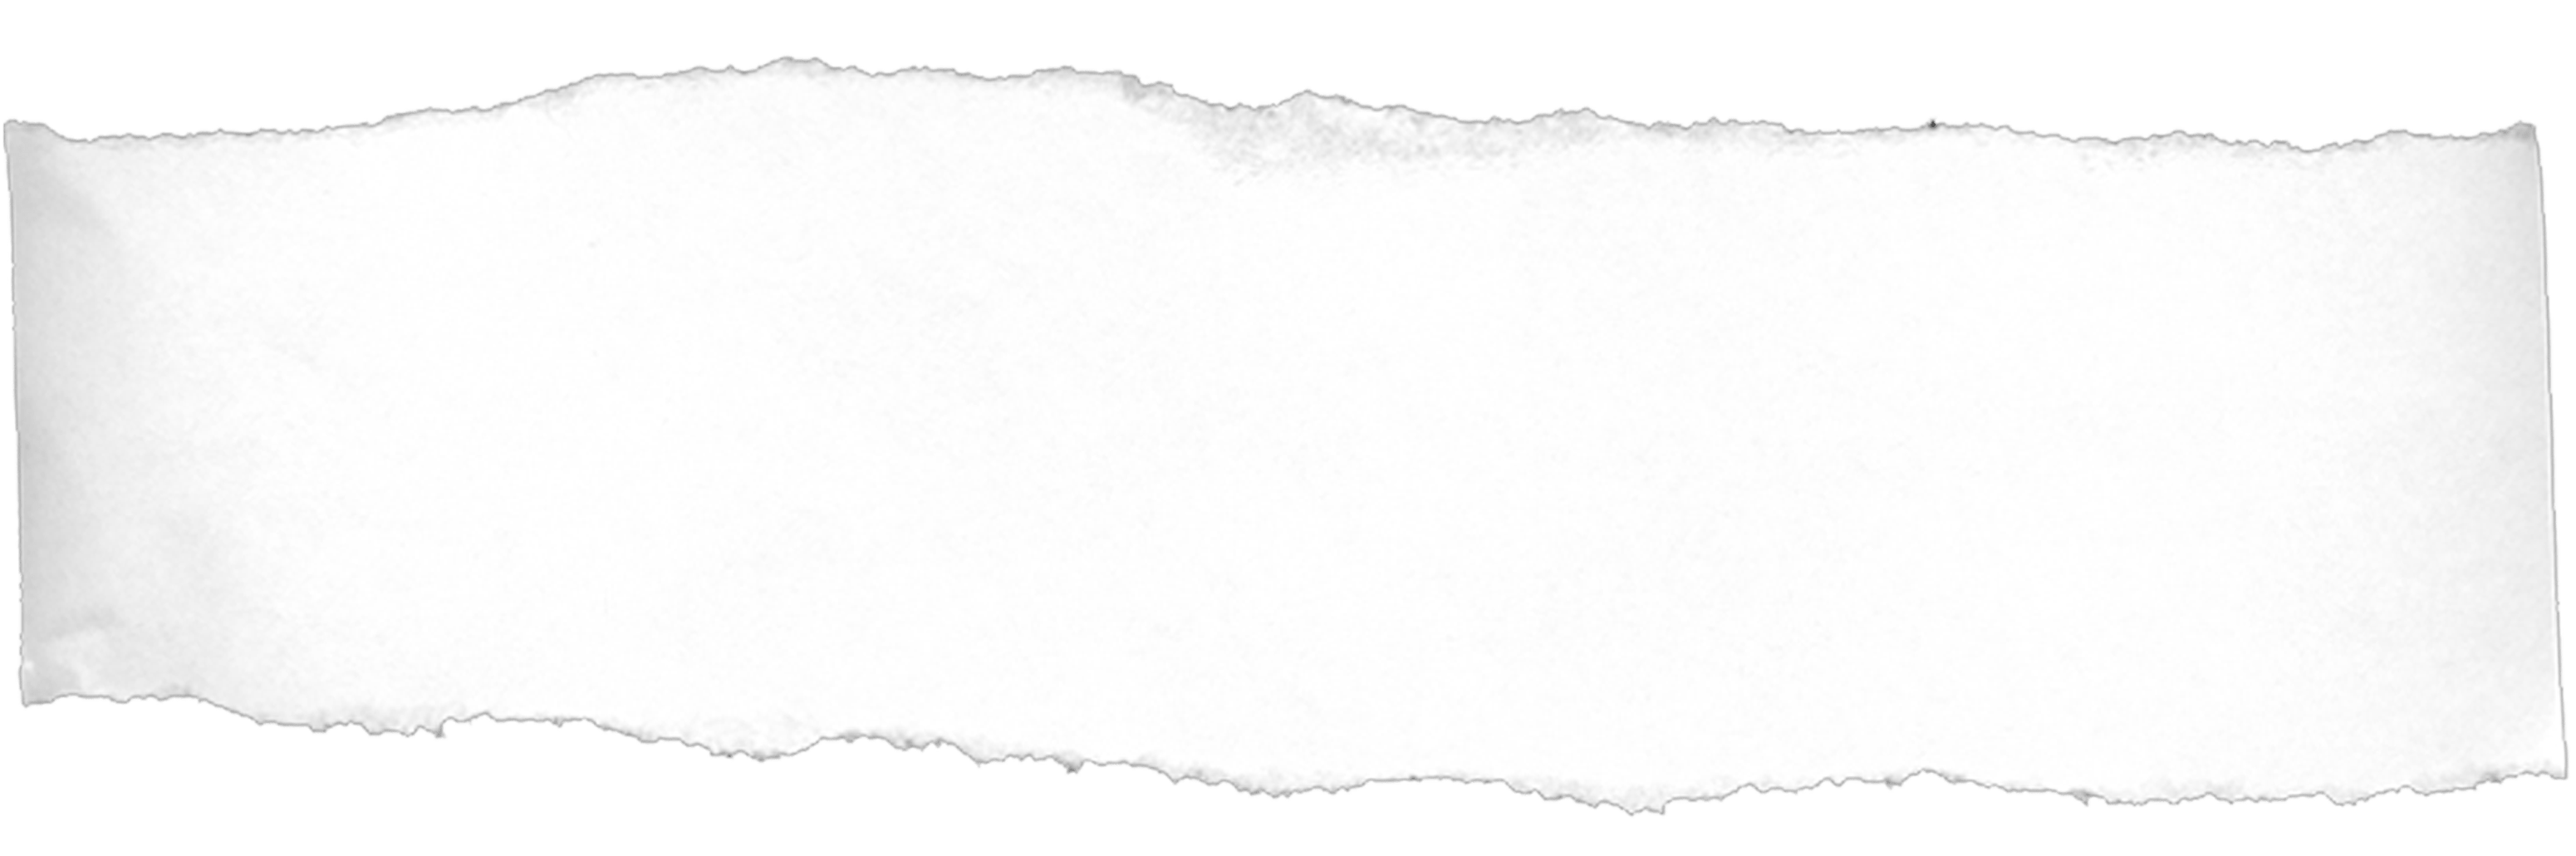 White Straight Ripped Paper Pictures Png Transparent Background Free Download 450 Freeiconspng